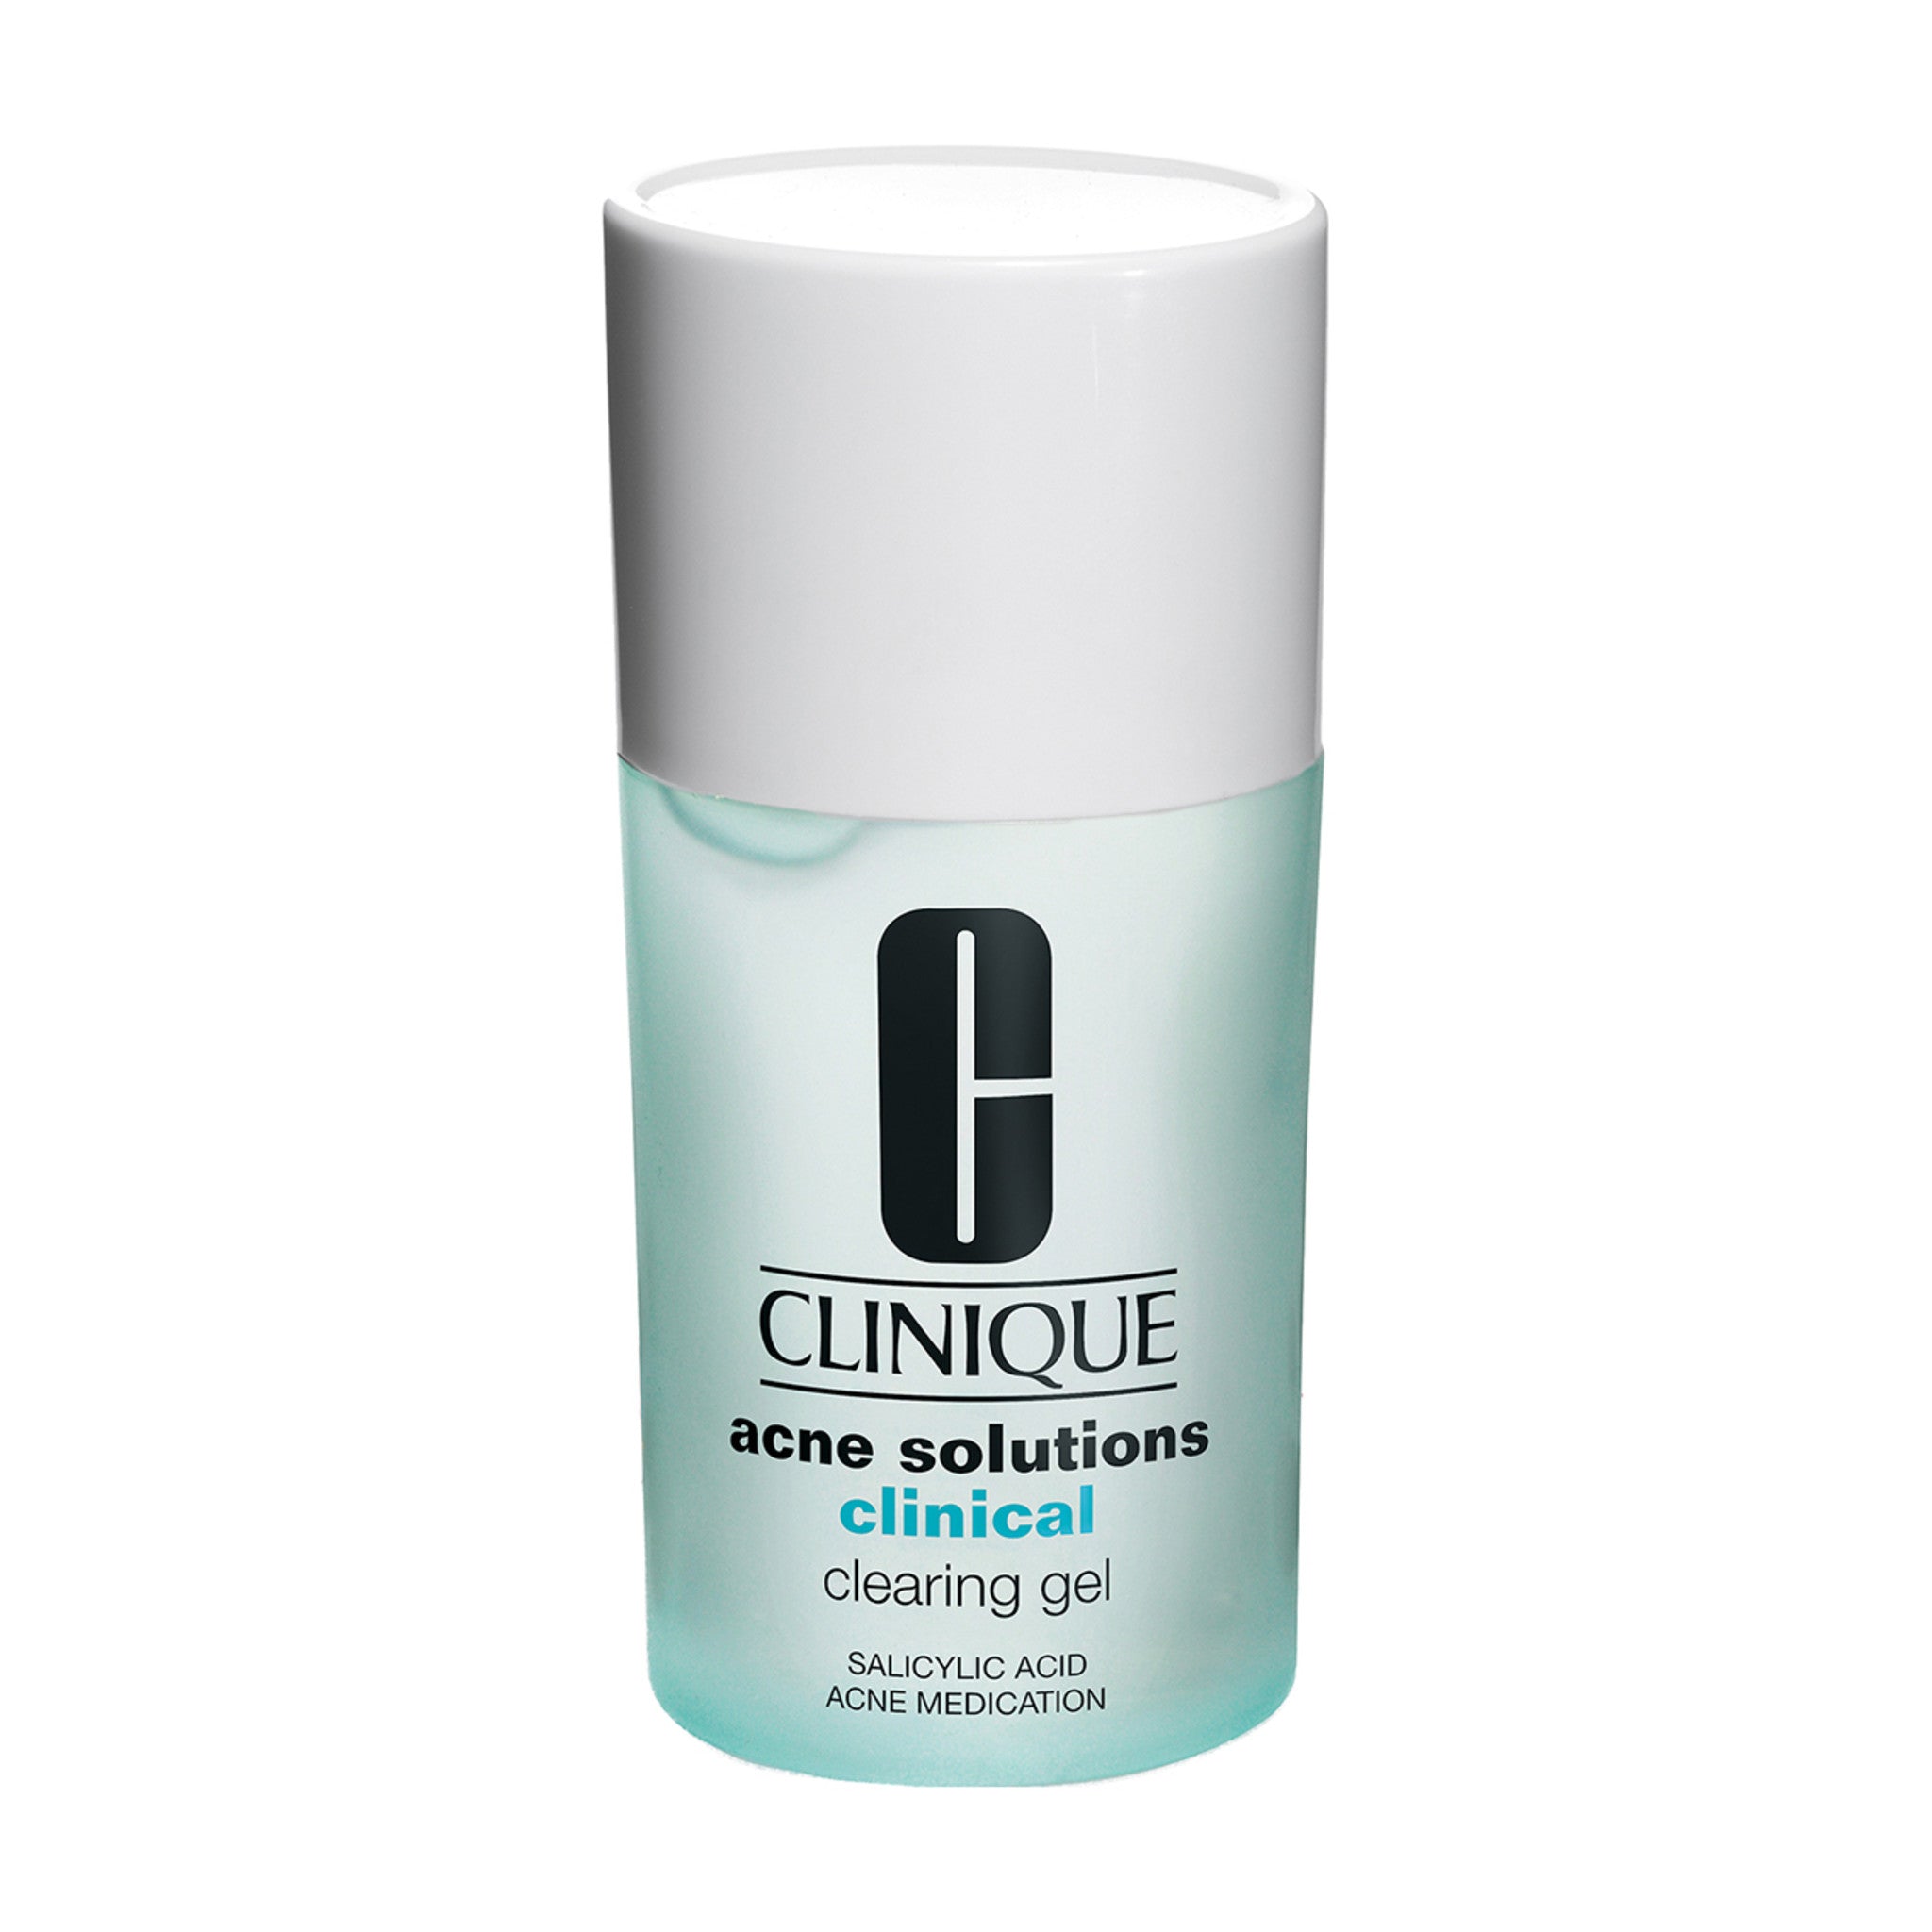 Clinique Acne Solutions Clinical Clearing Gel Size variant: 1.0 oz main image.